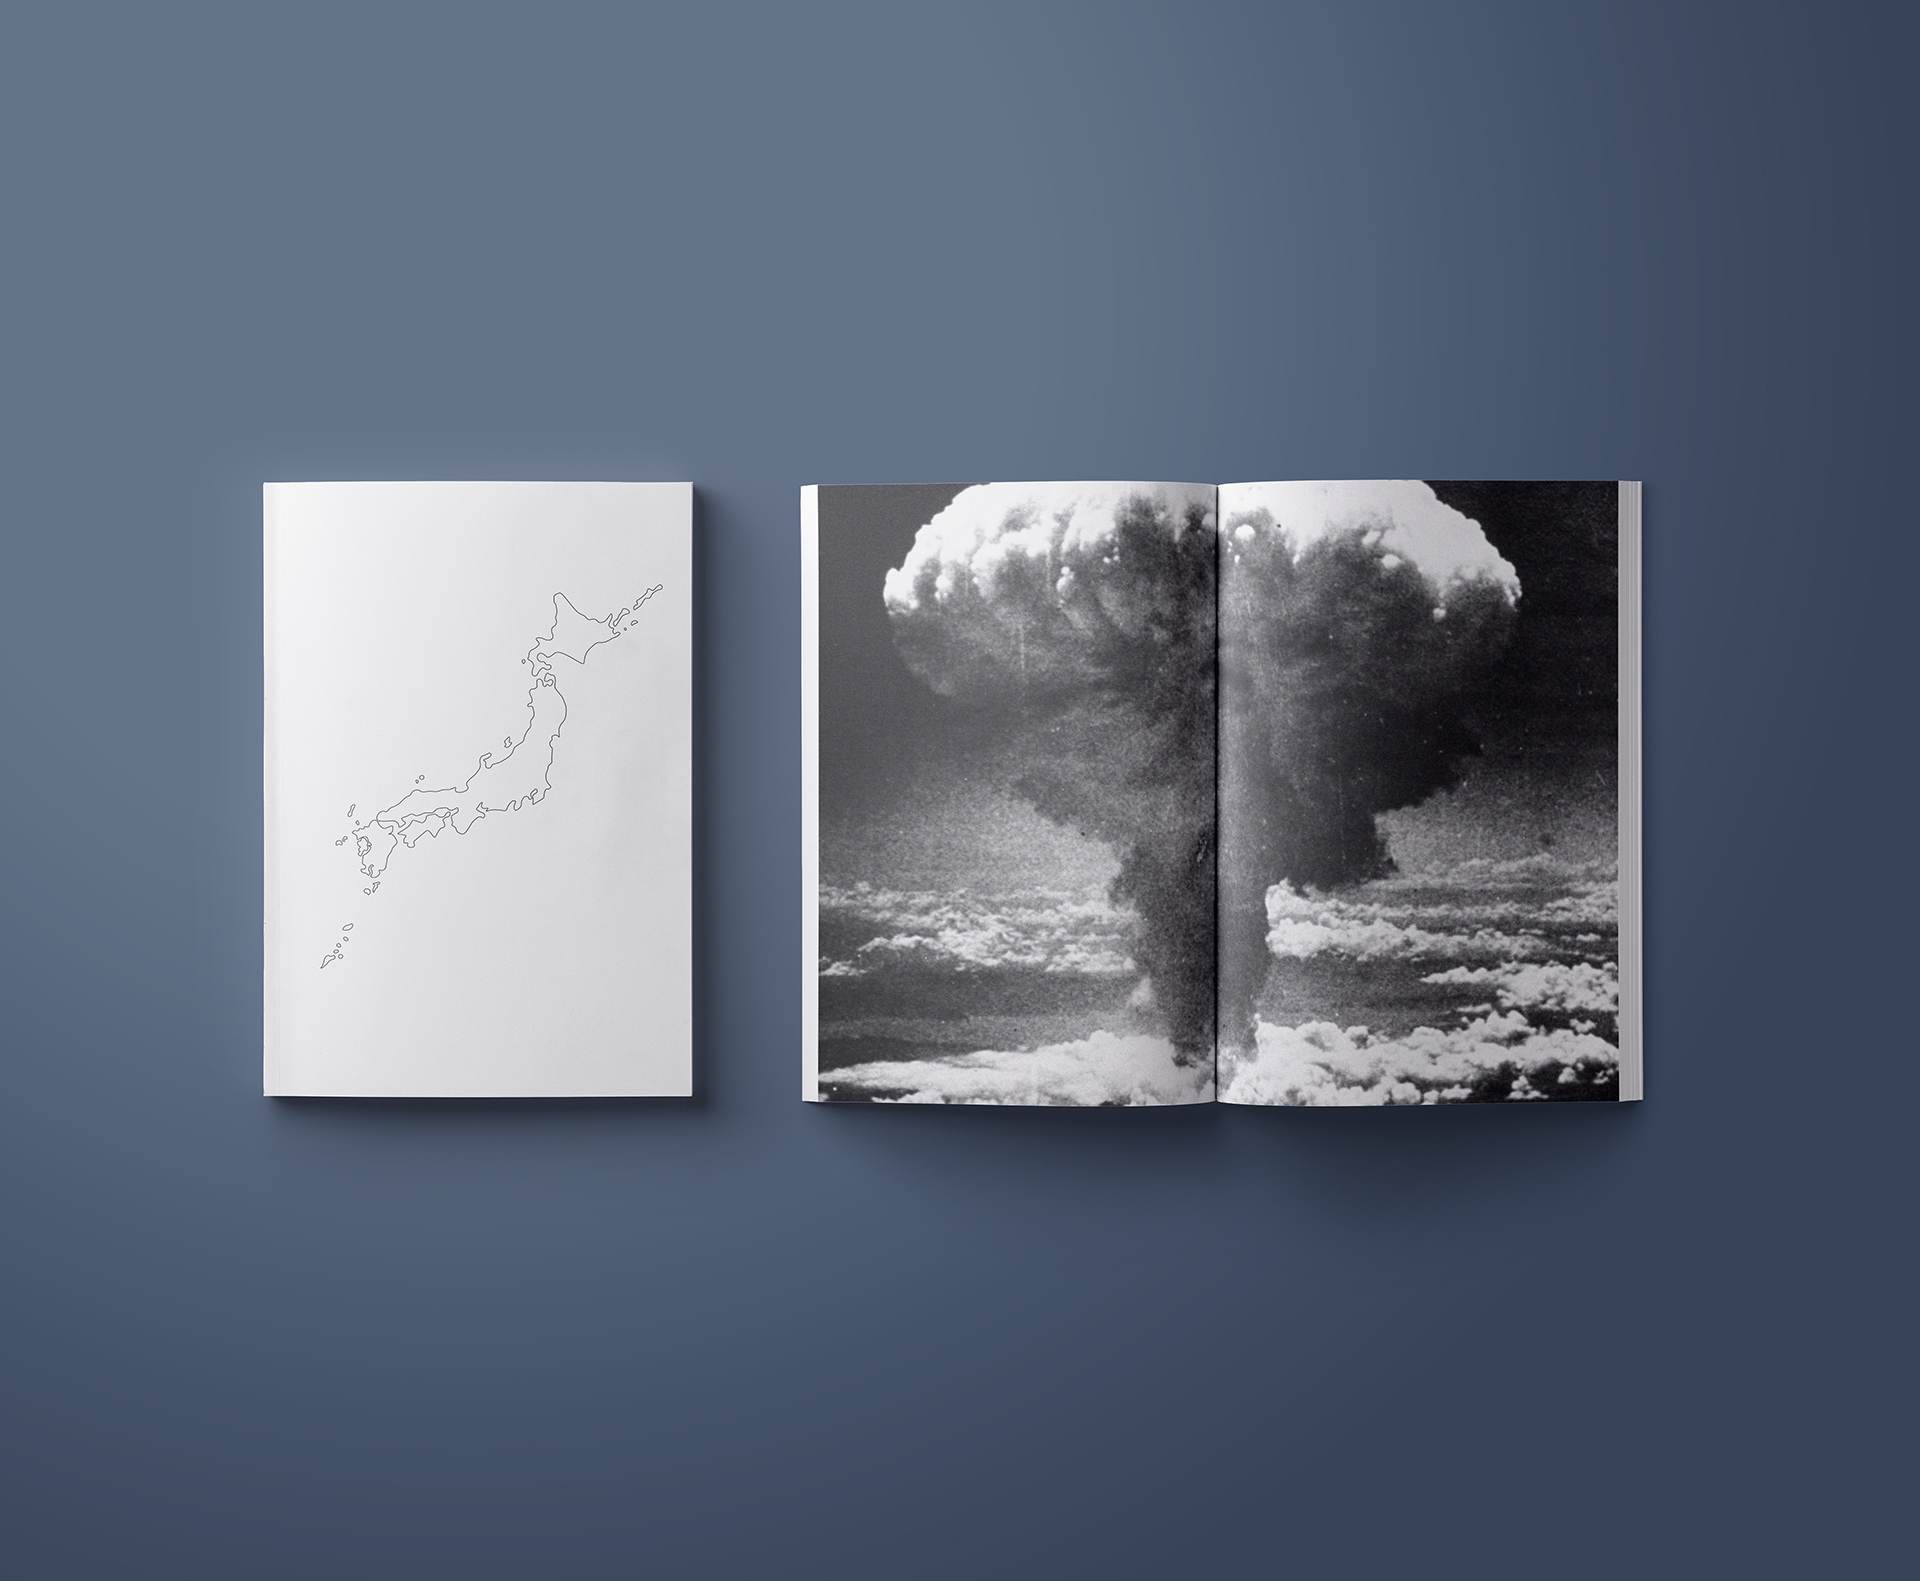 book with image of large bomb explosion